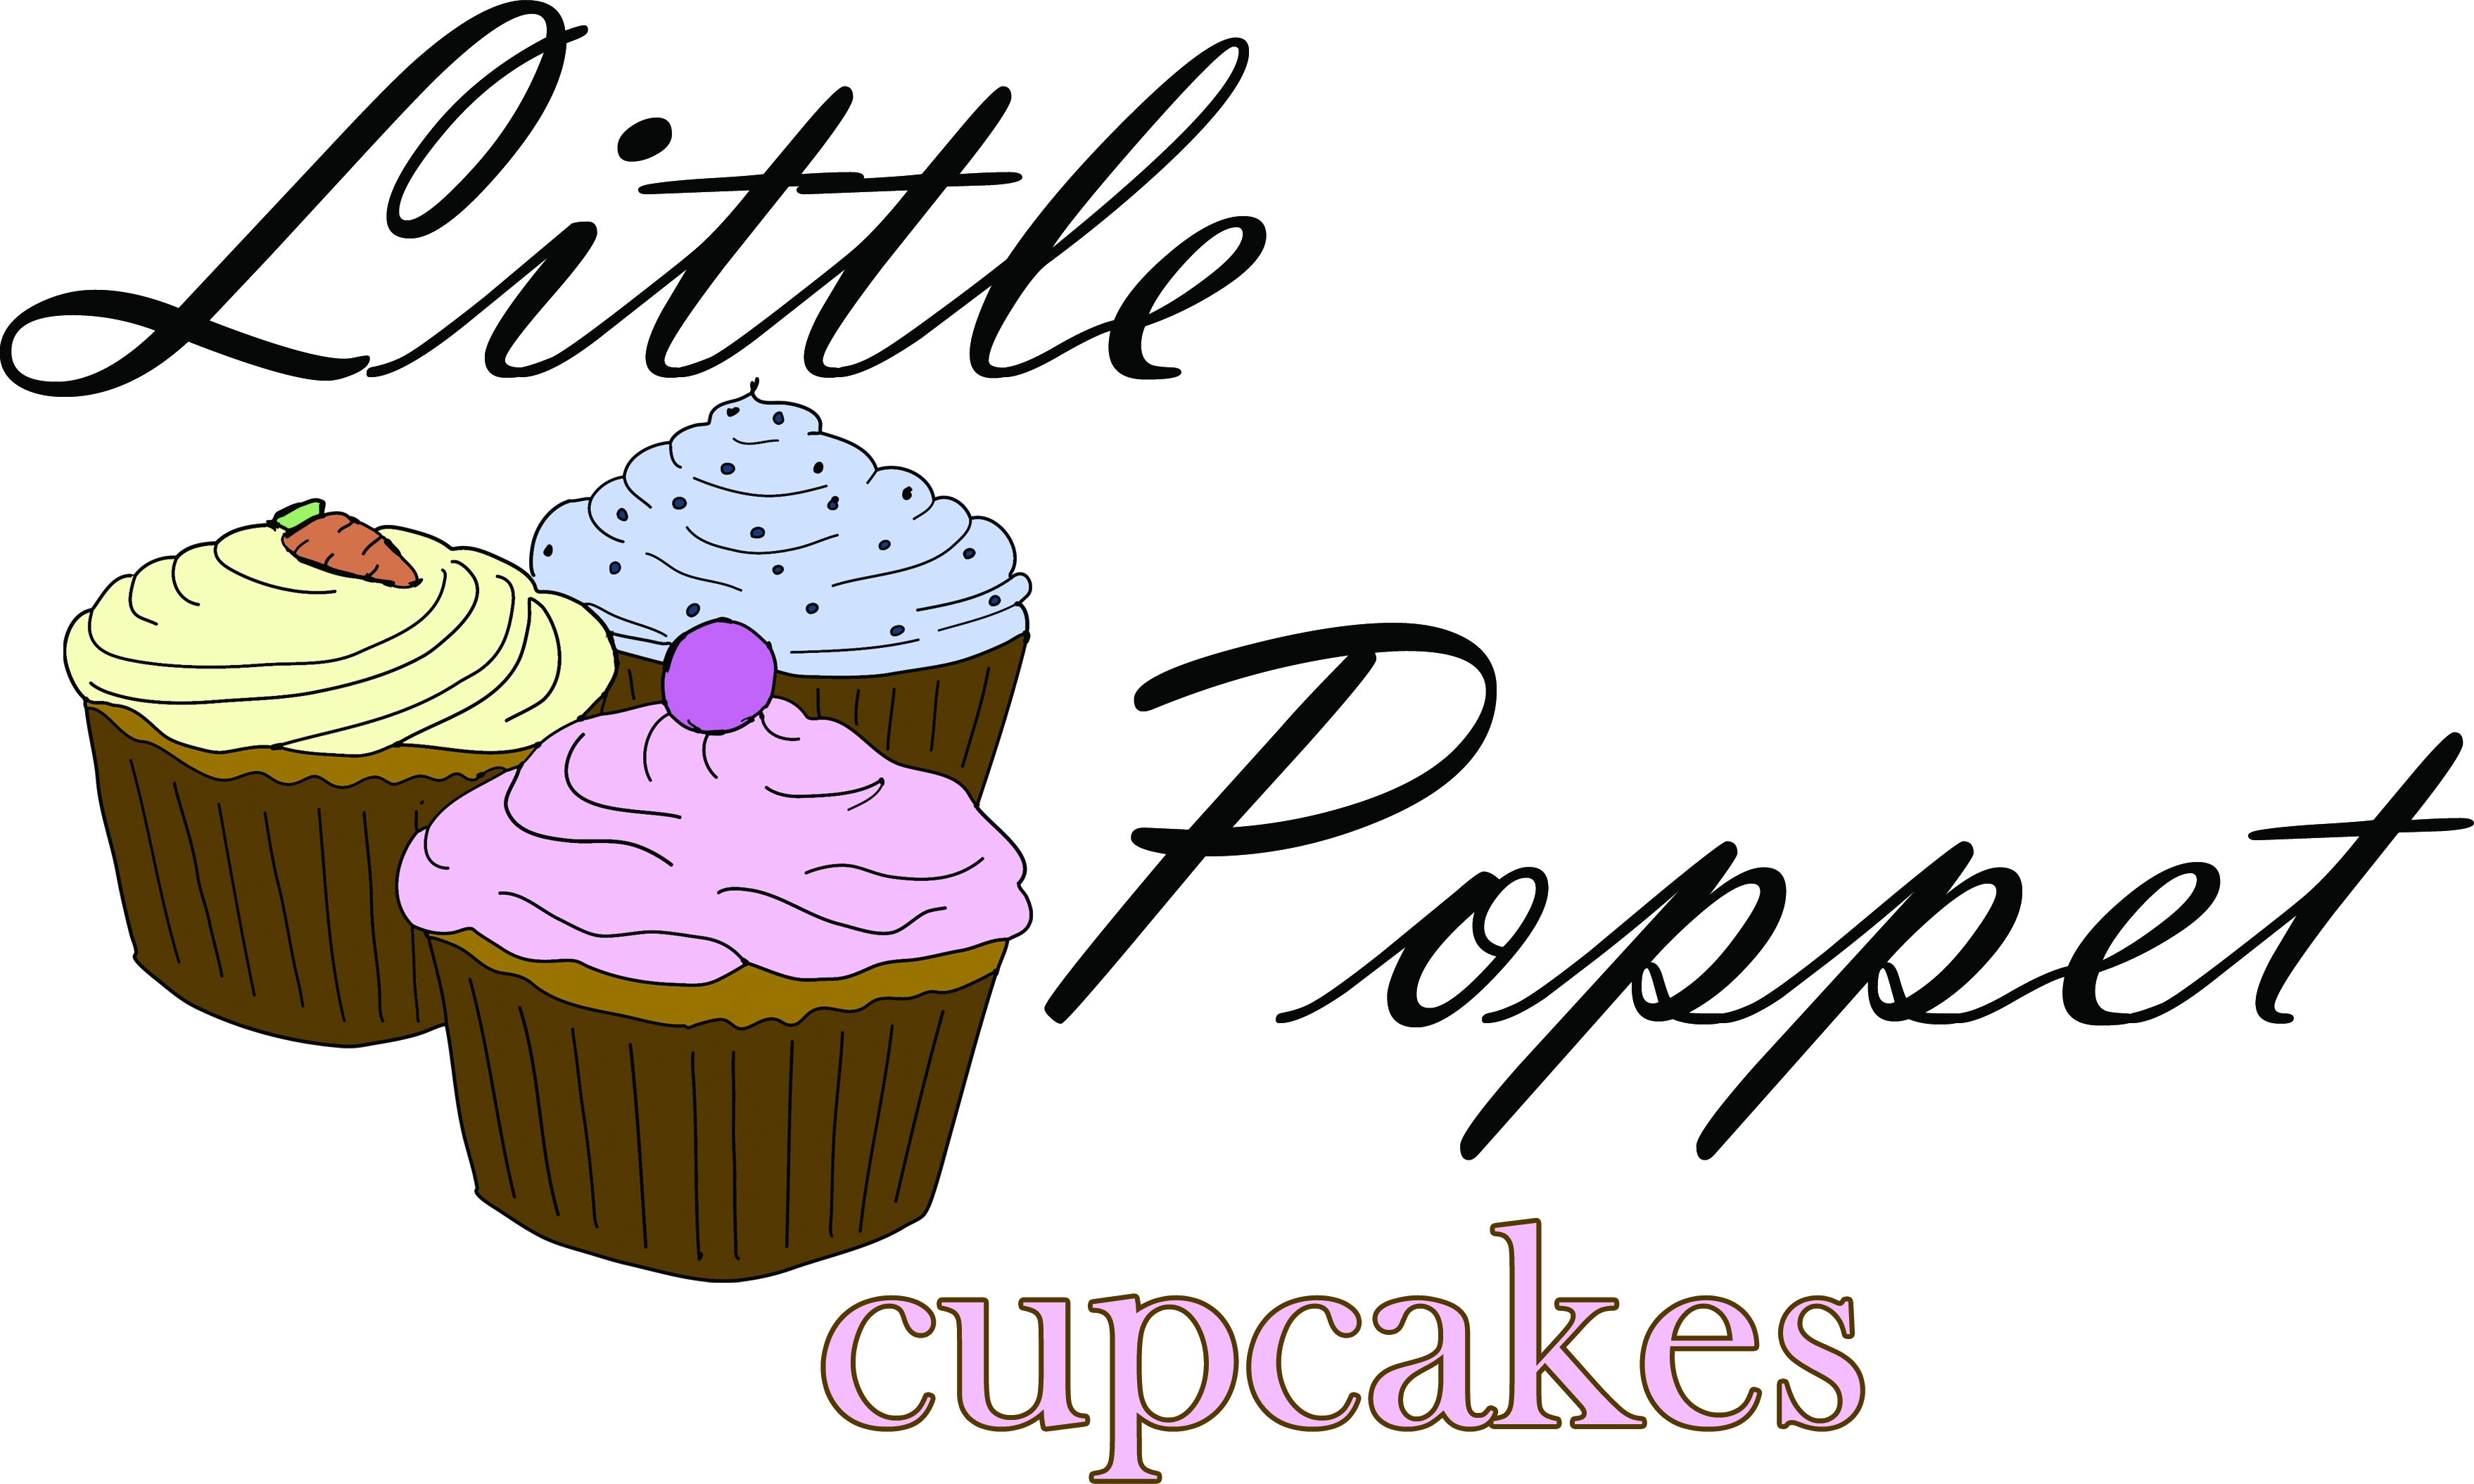 Little Poppet Cupcakes - Occasion Cakes, Cupcakes & Balloons